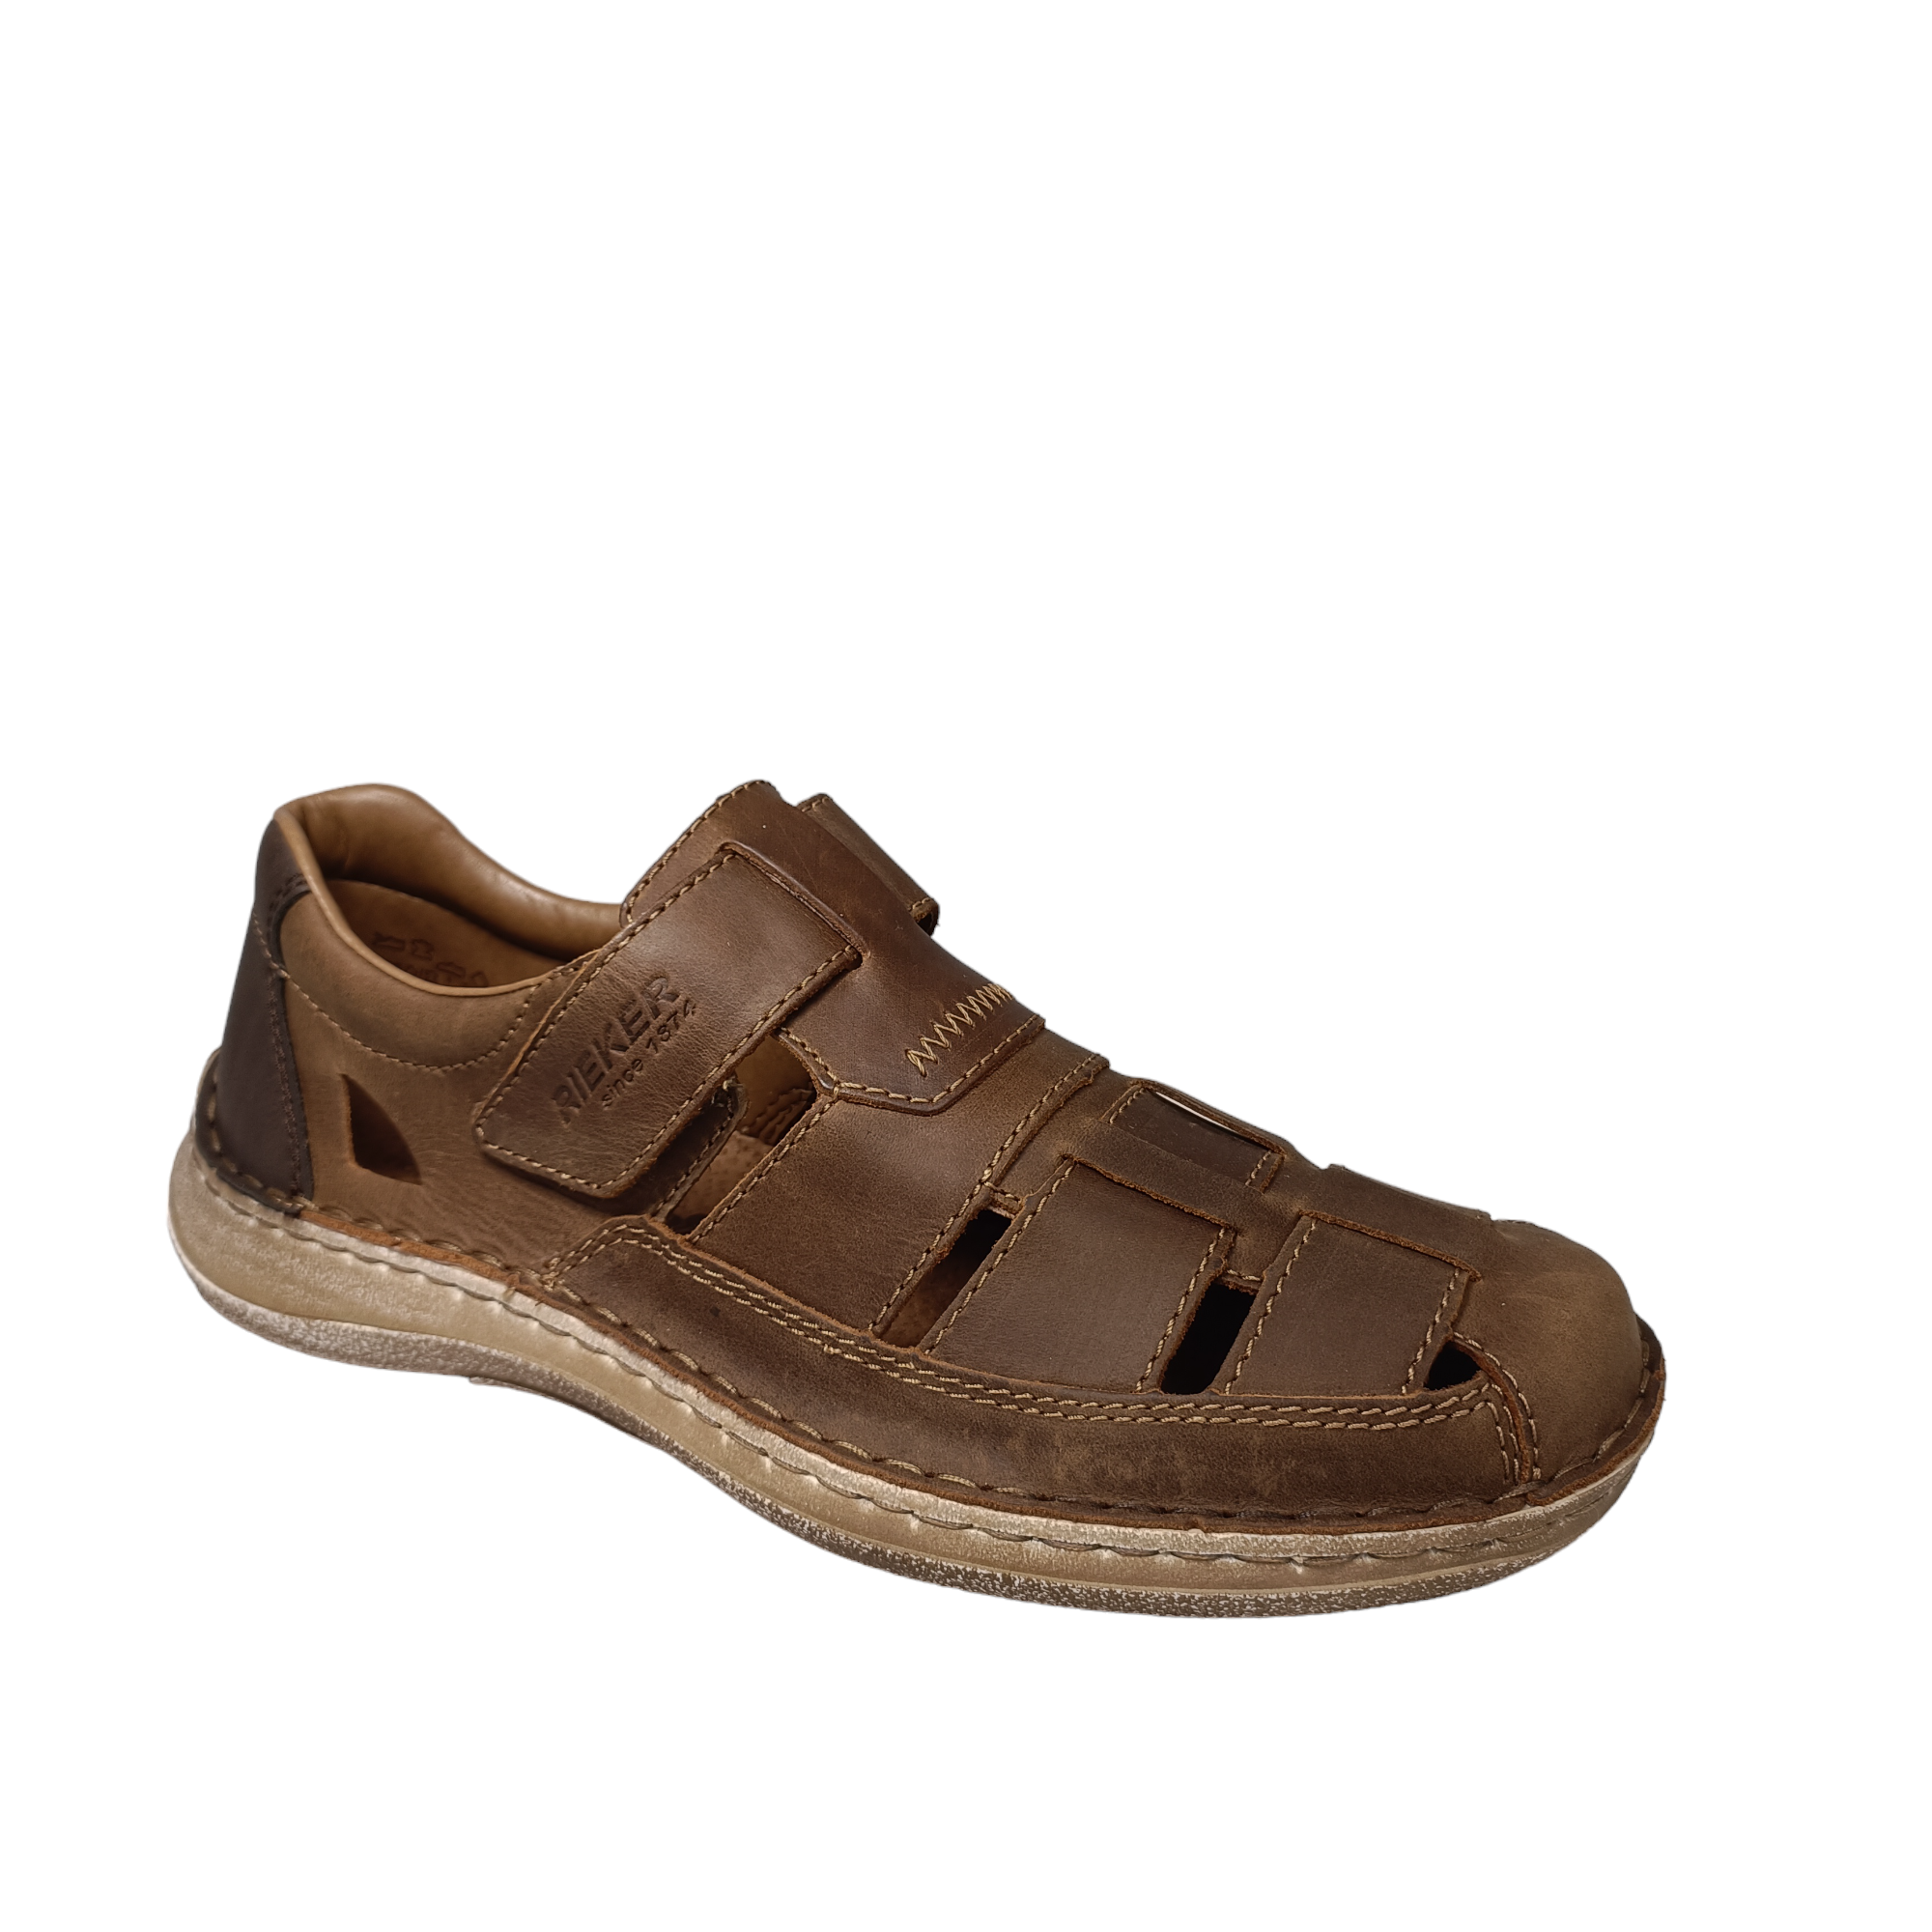 Shop 03078 Mens Rieker - with shoe&amp;me - from Rieker - Shoes - Mens, Shoe, Summer - [collection]